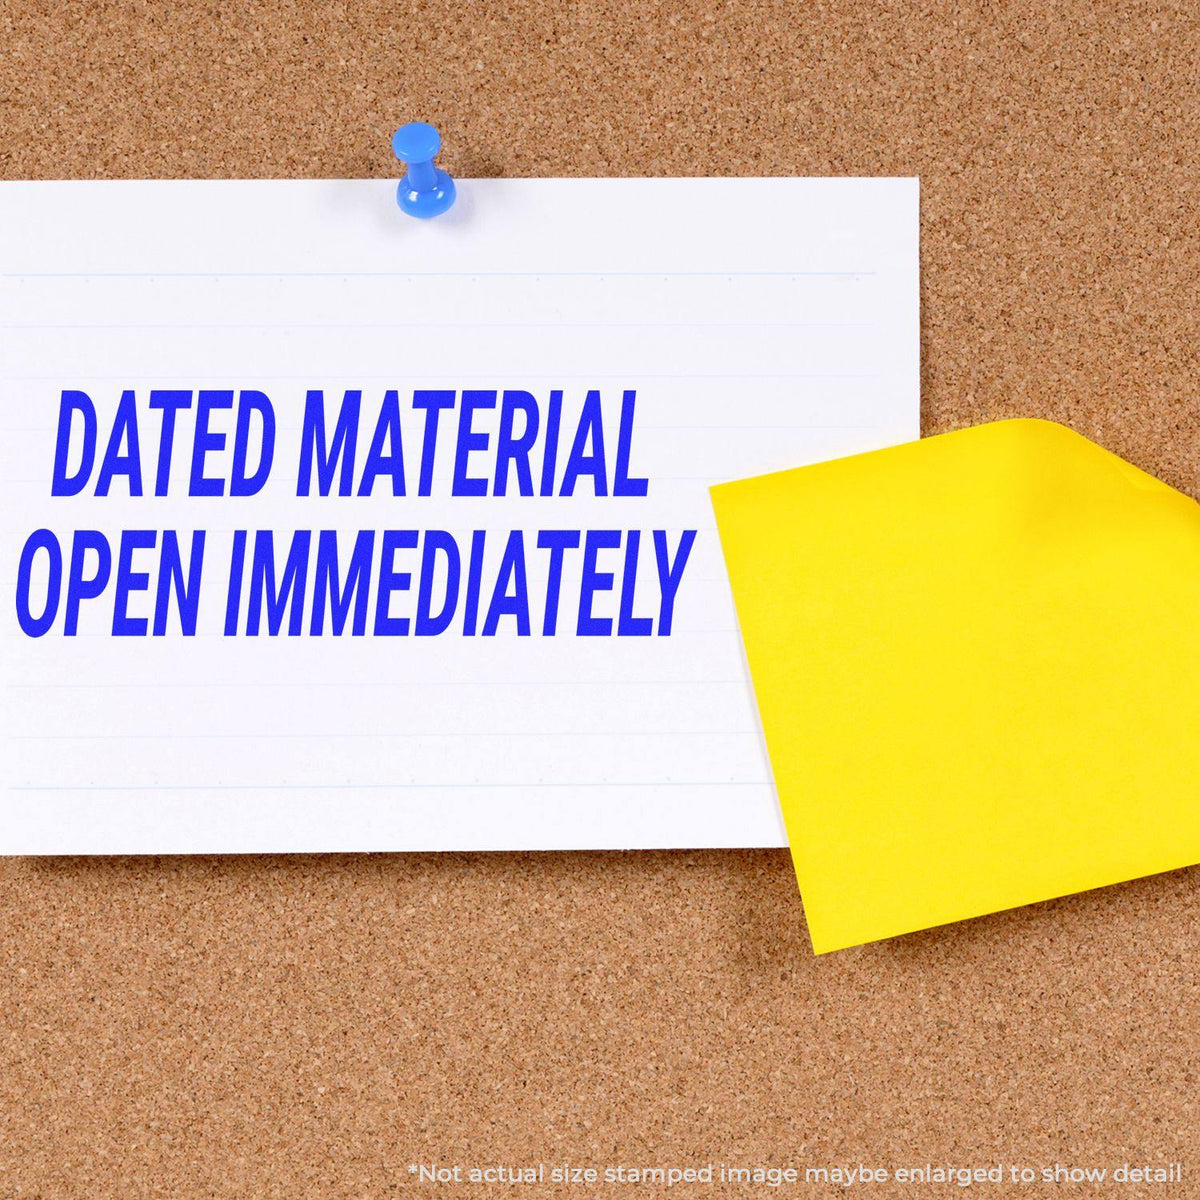 Dated Material Open Immediately Rubber Stamp Lifestyle Photo